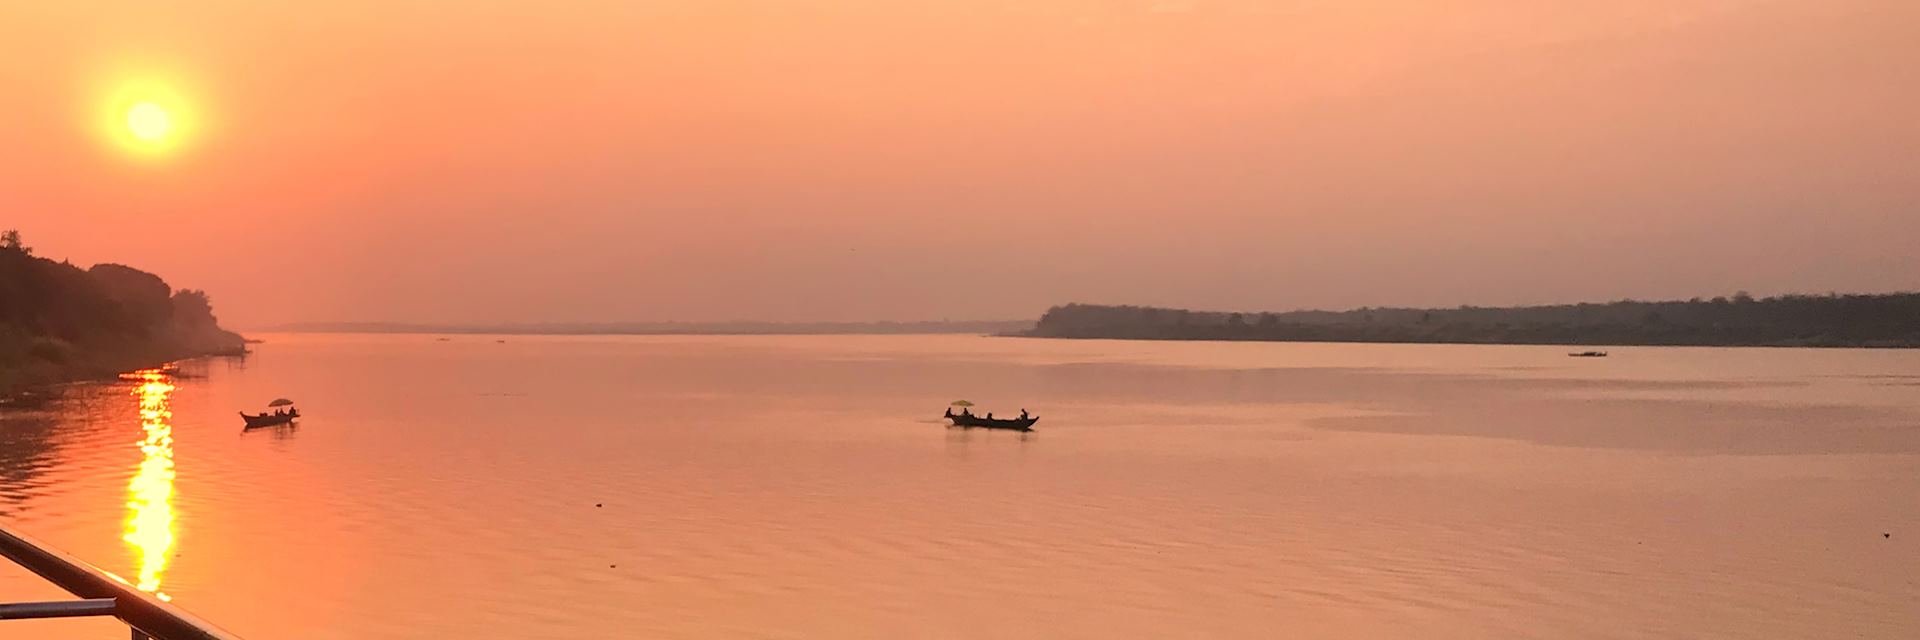 Cruising on the Mekong River at sunset